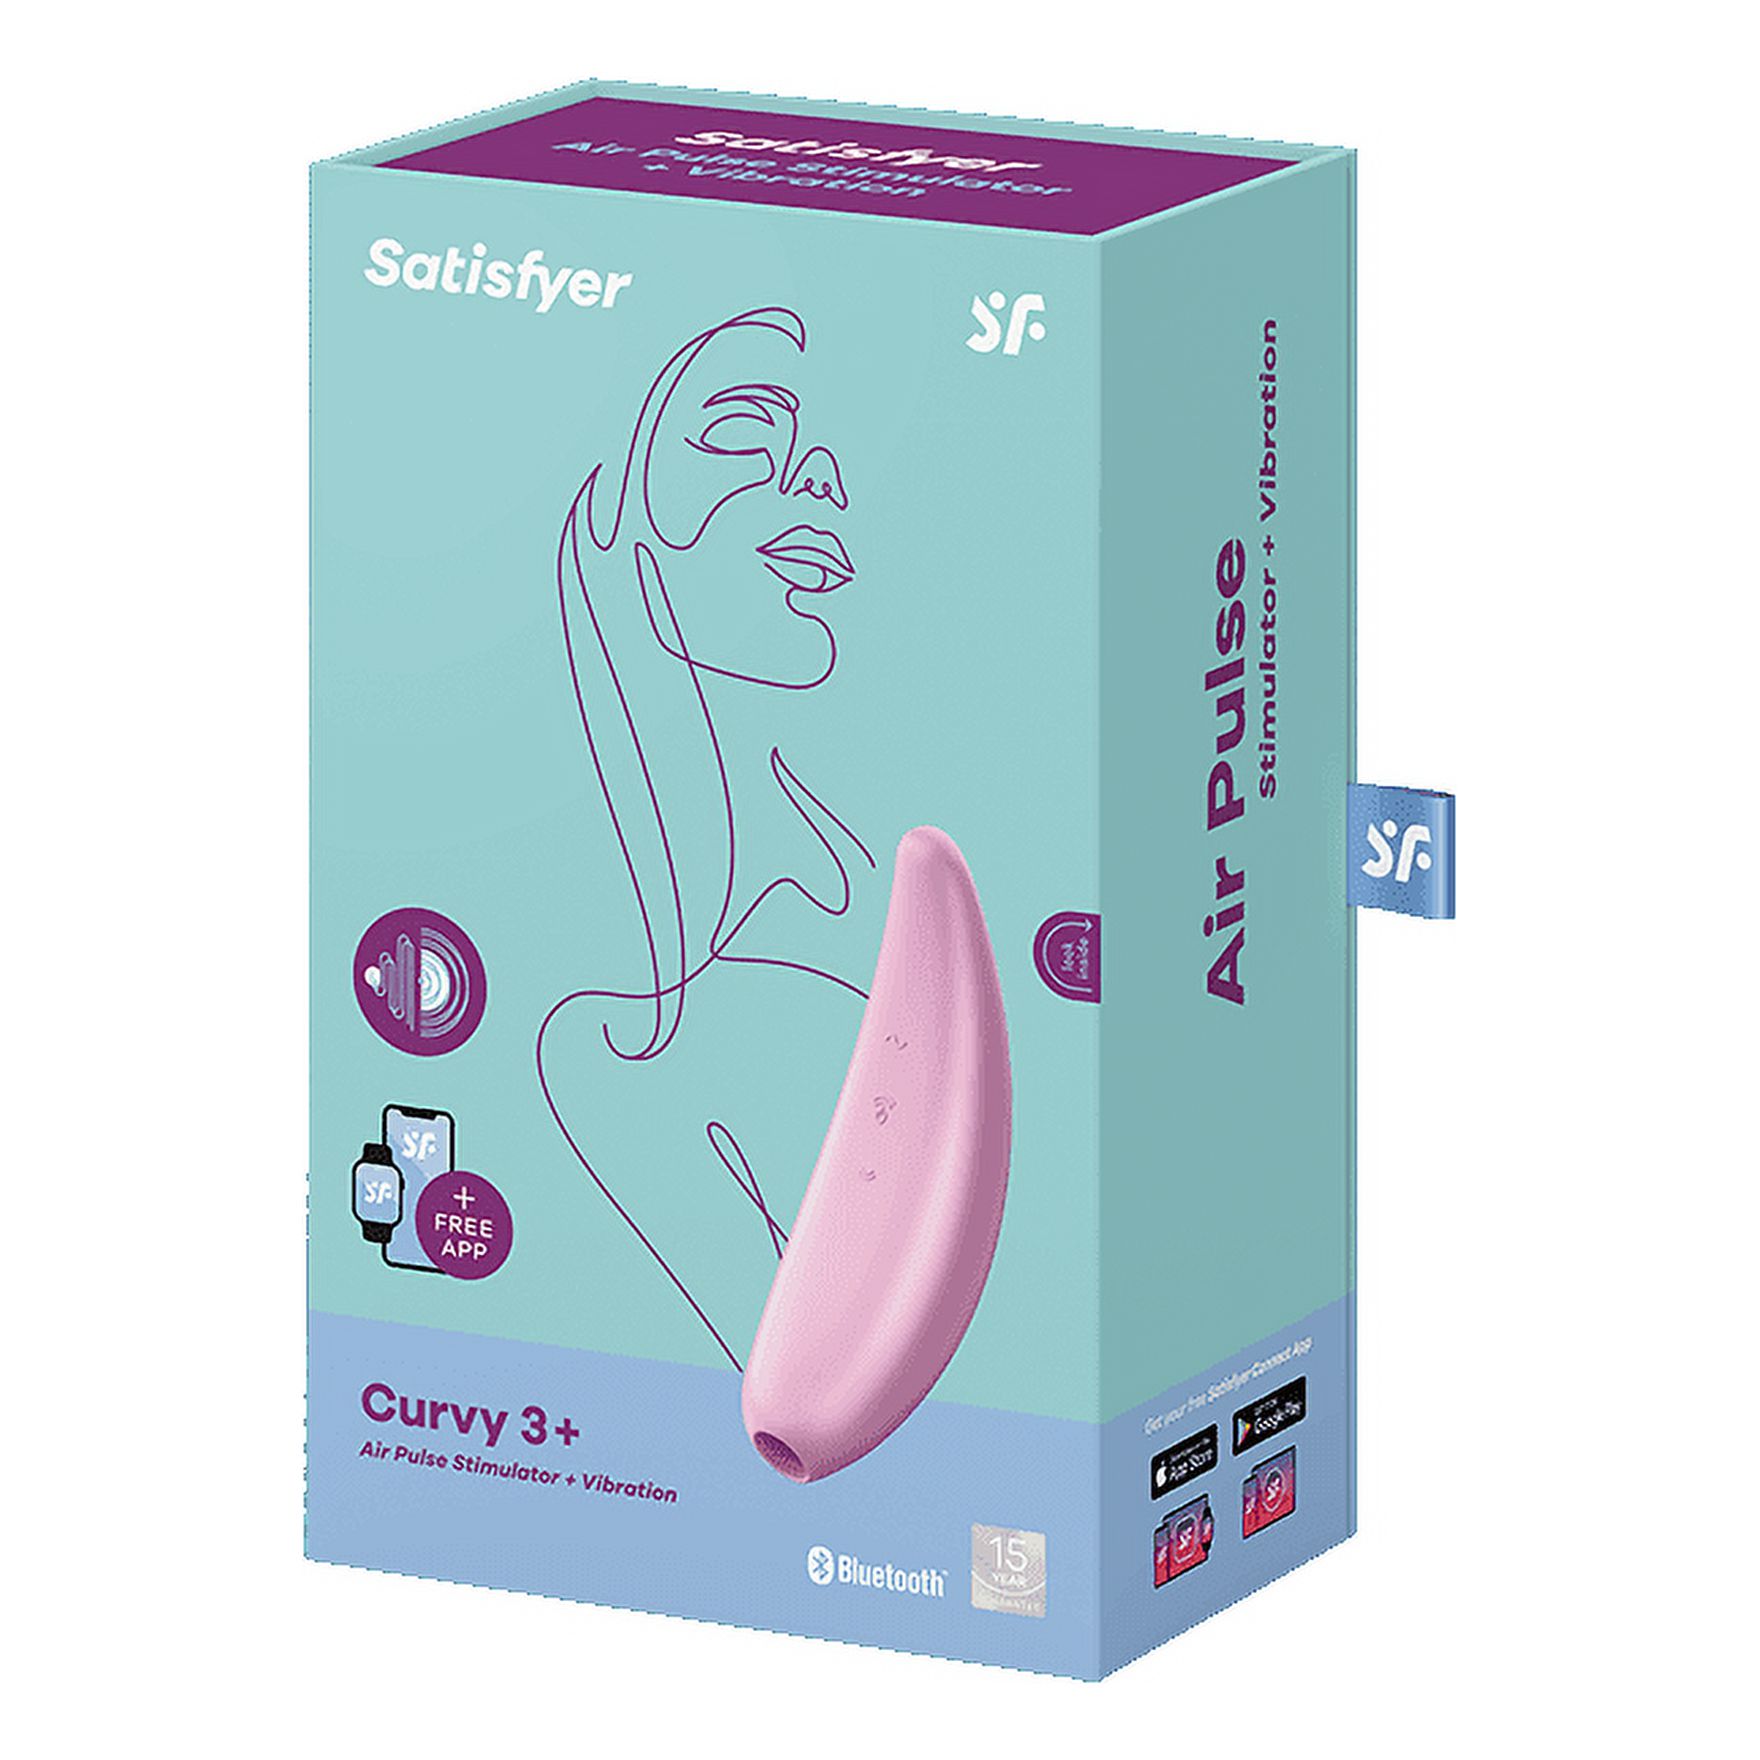 Satisfyer Curvy 3+ Air-Pulse Clitoris Stimulating Vibrator with App Control - Clitoral Sucking Pressure-Wave Technology & Vibration, Compatible with Satisfyer App, Waterproof, Rechargeable (Pink) - image 7 of 7